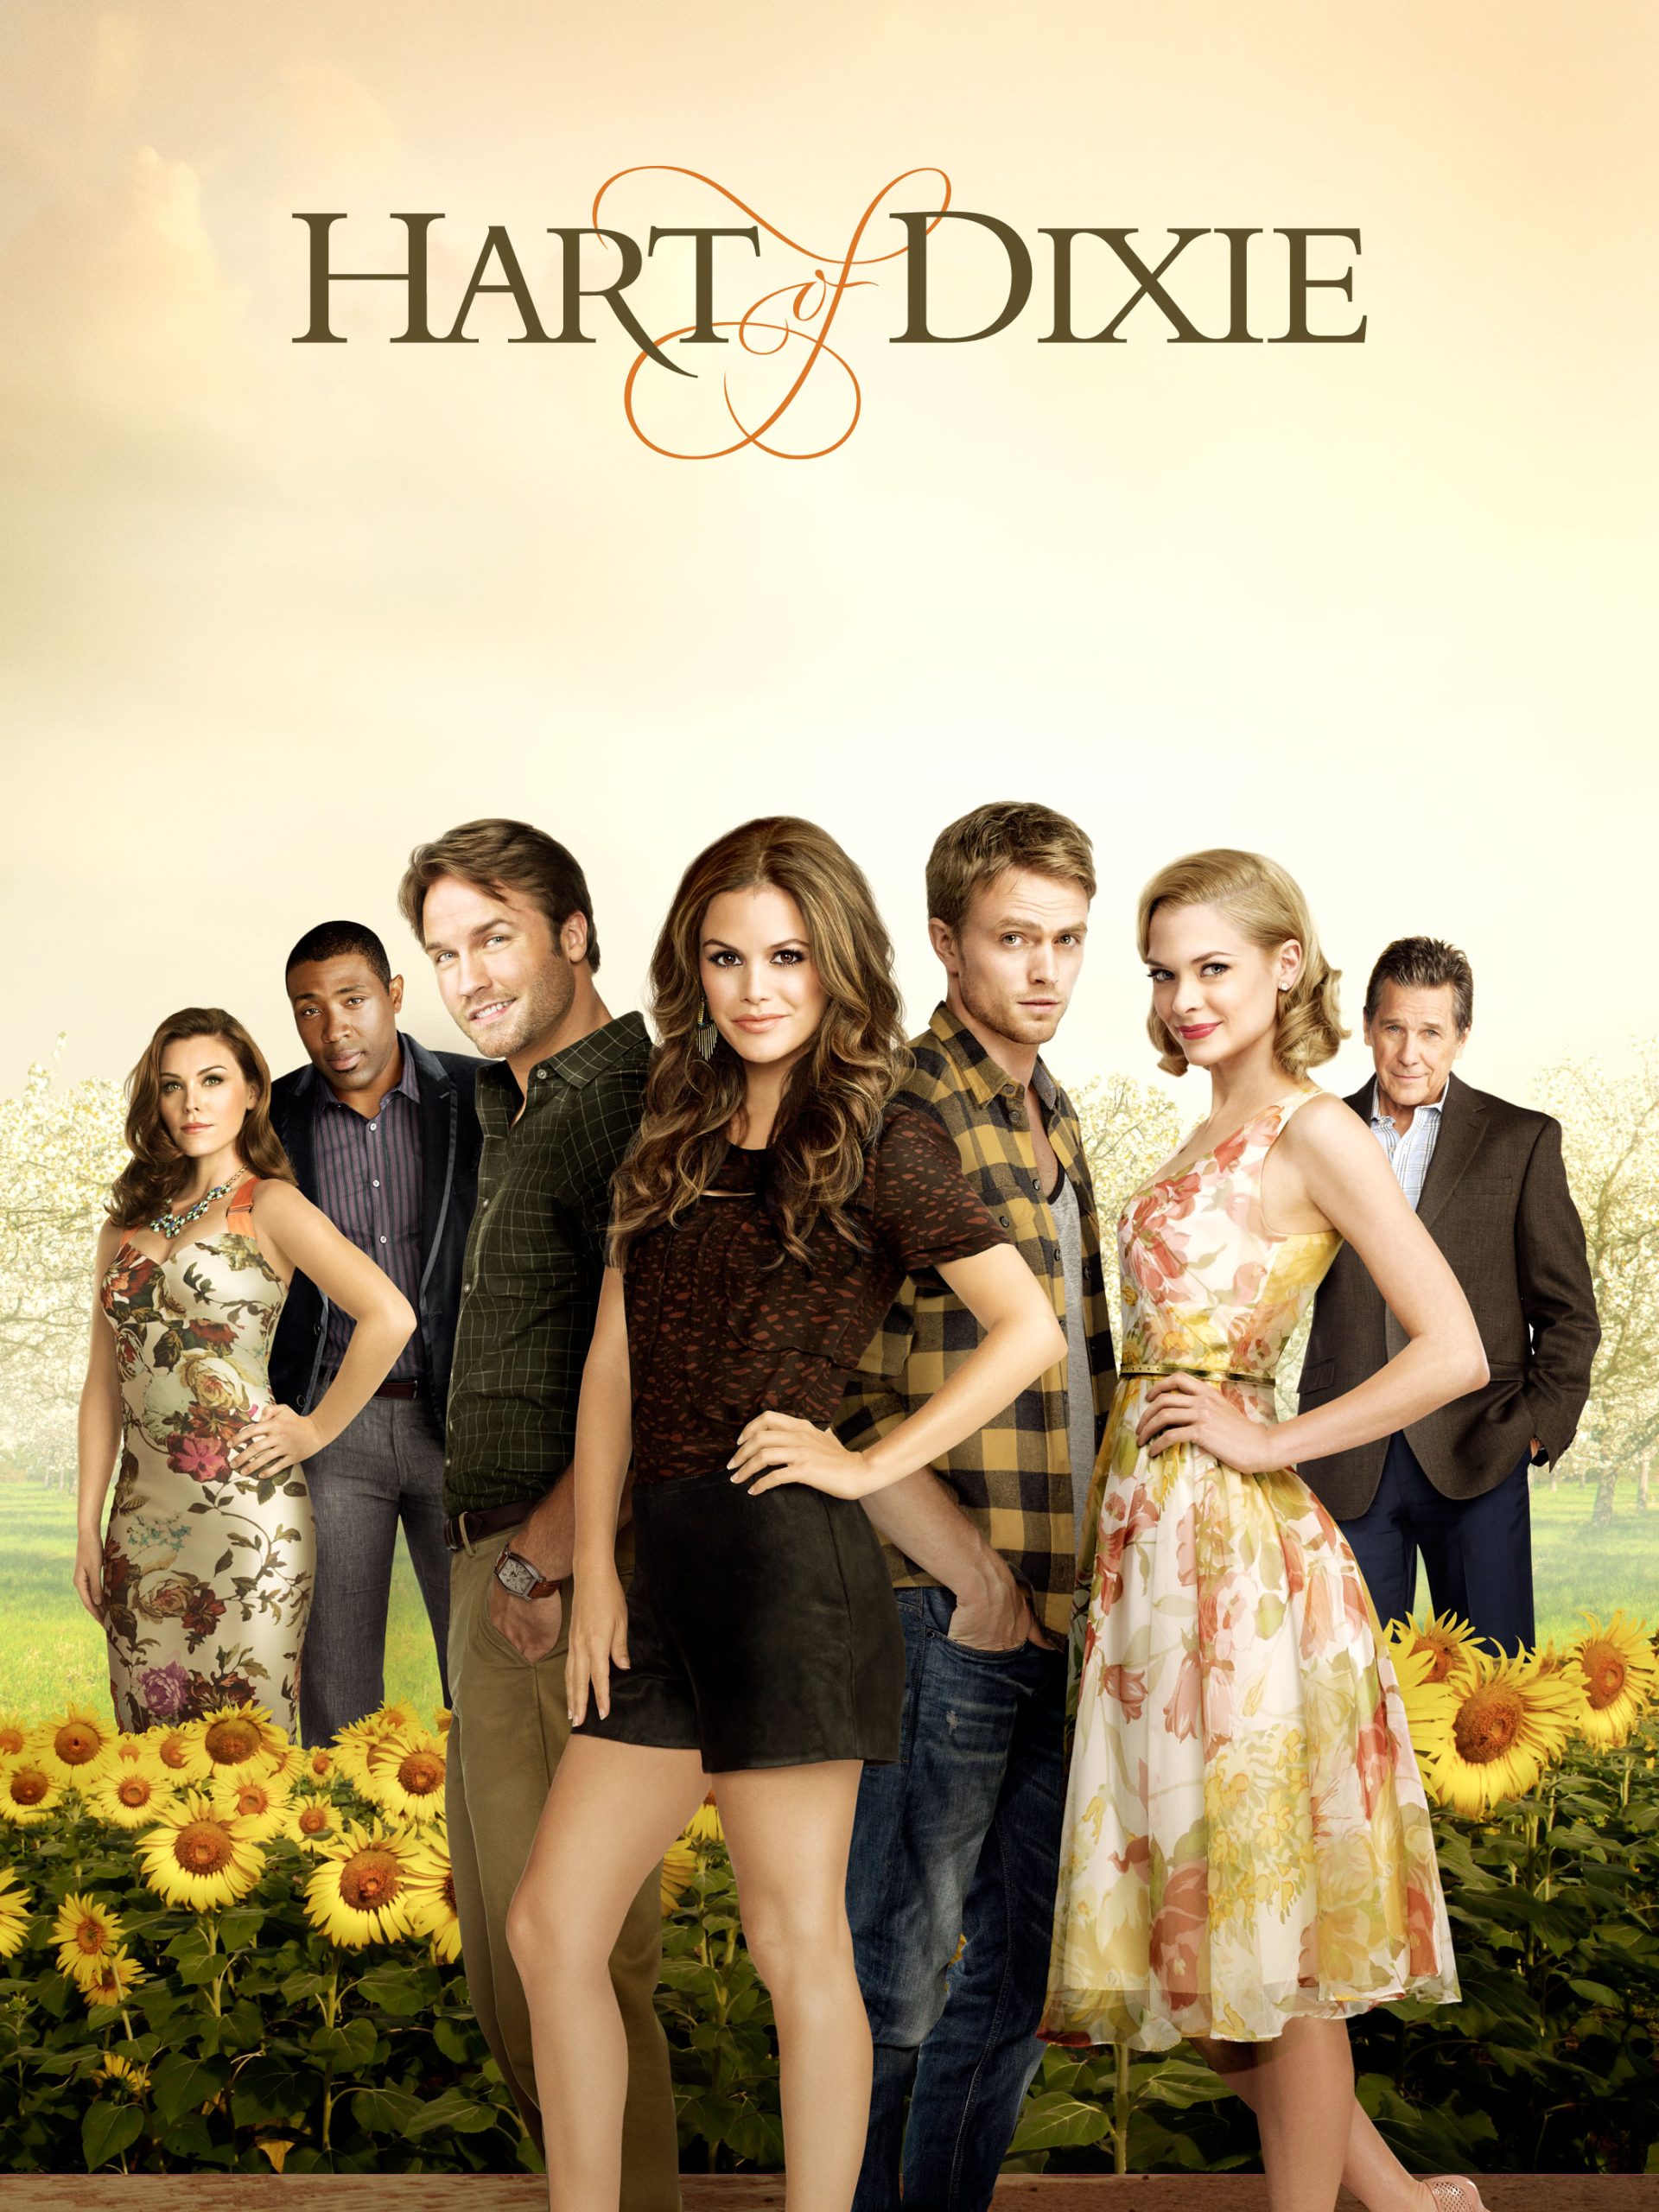 Hart of Dixie Synopsis